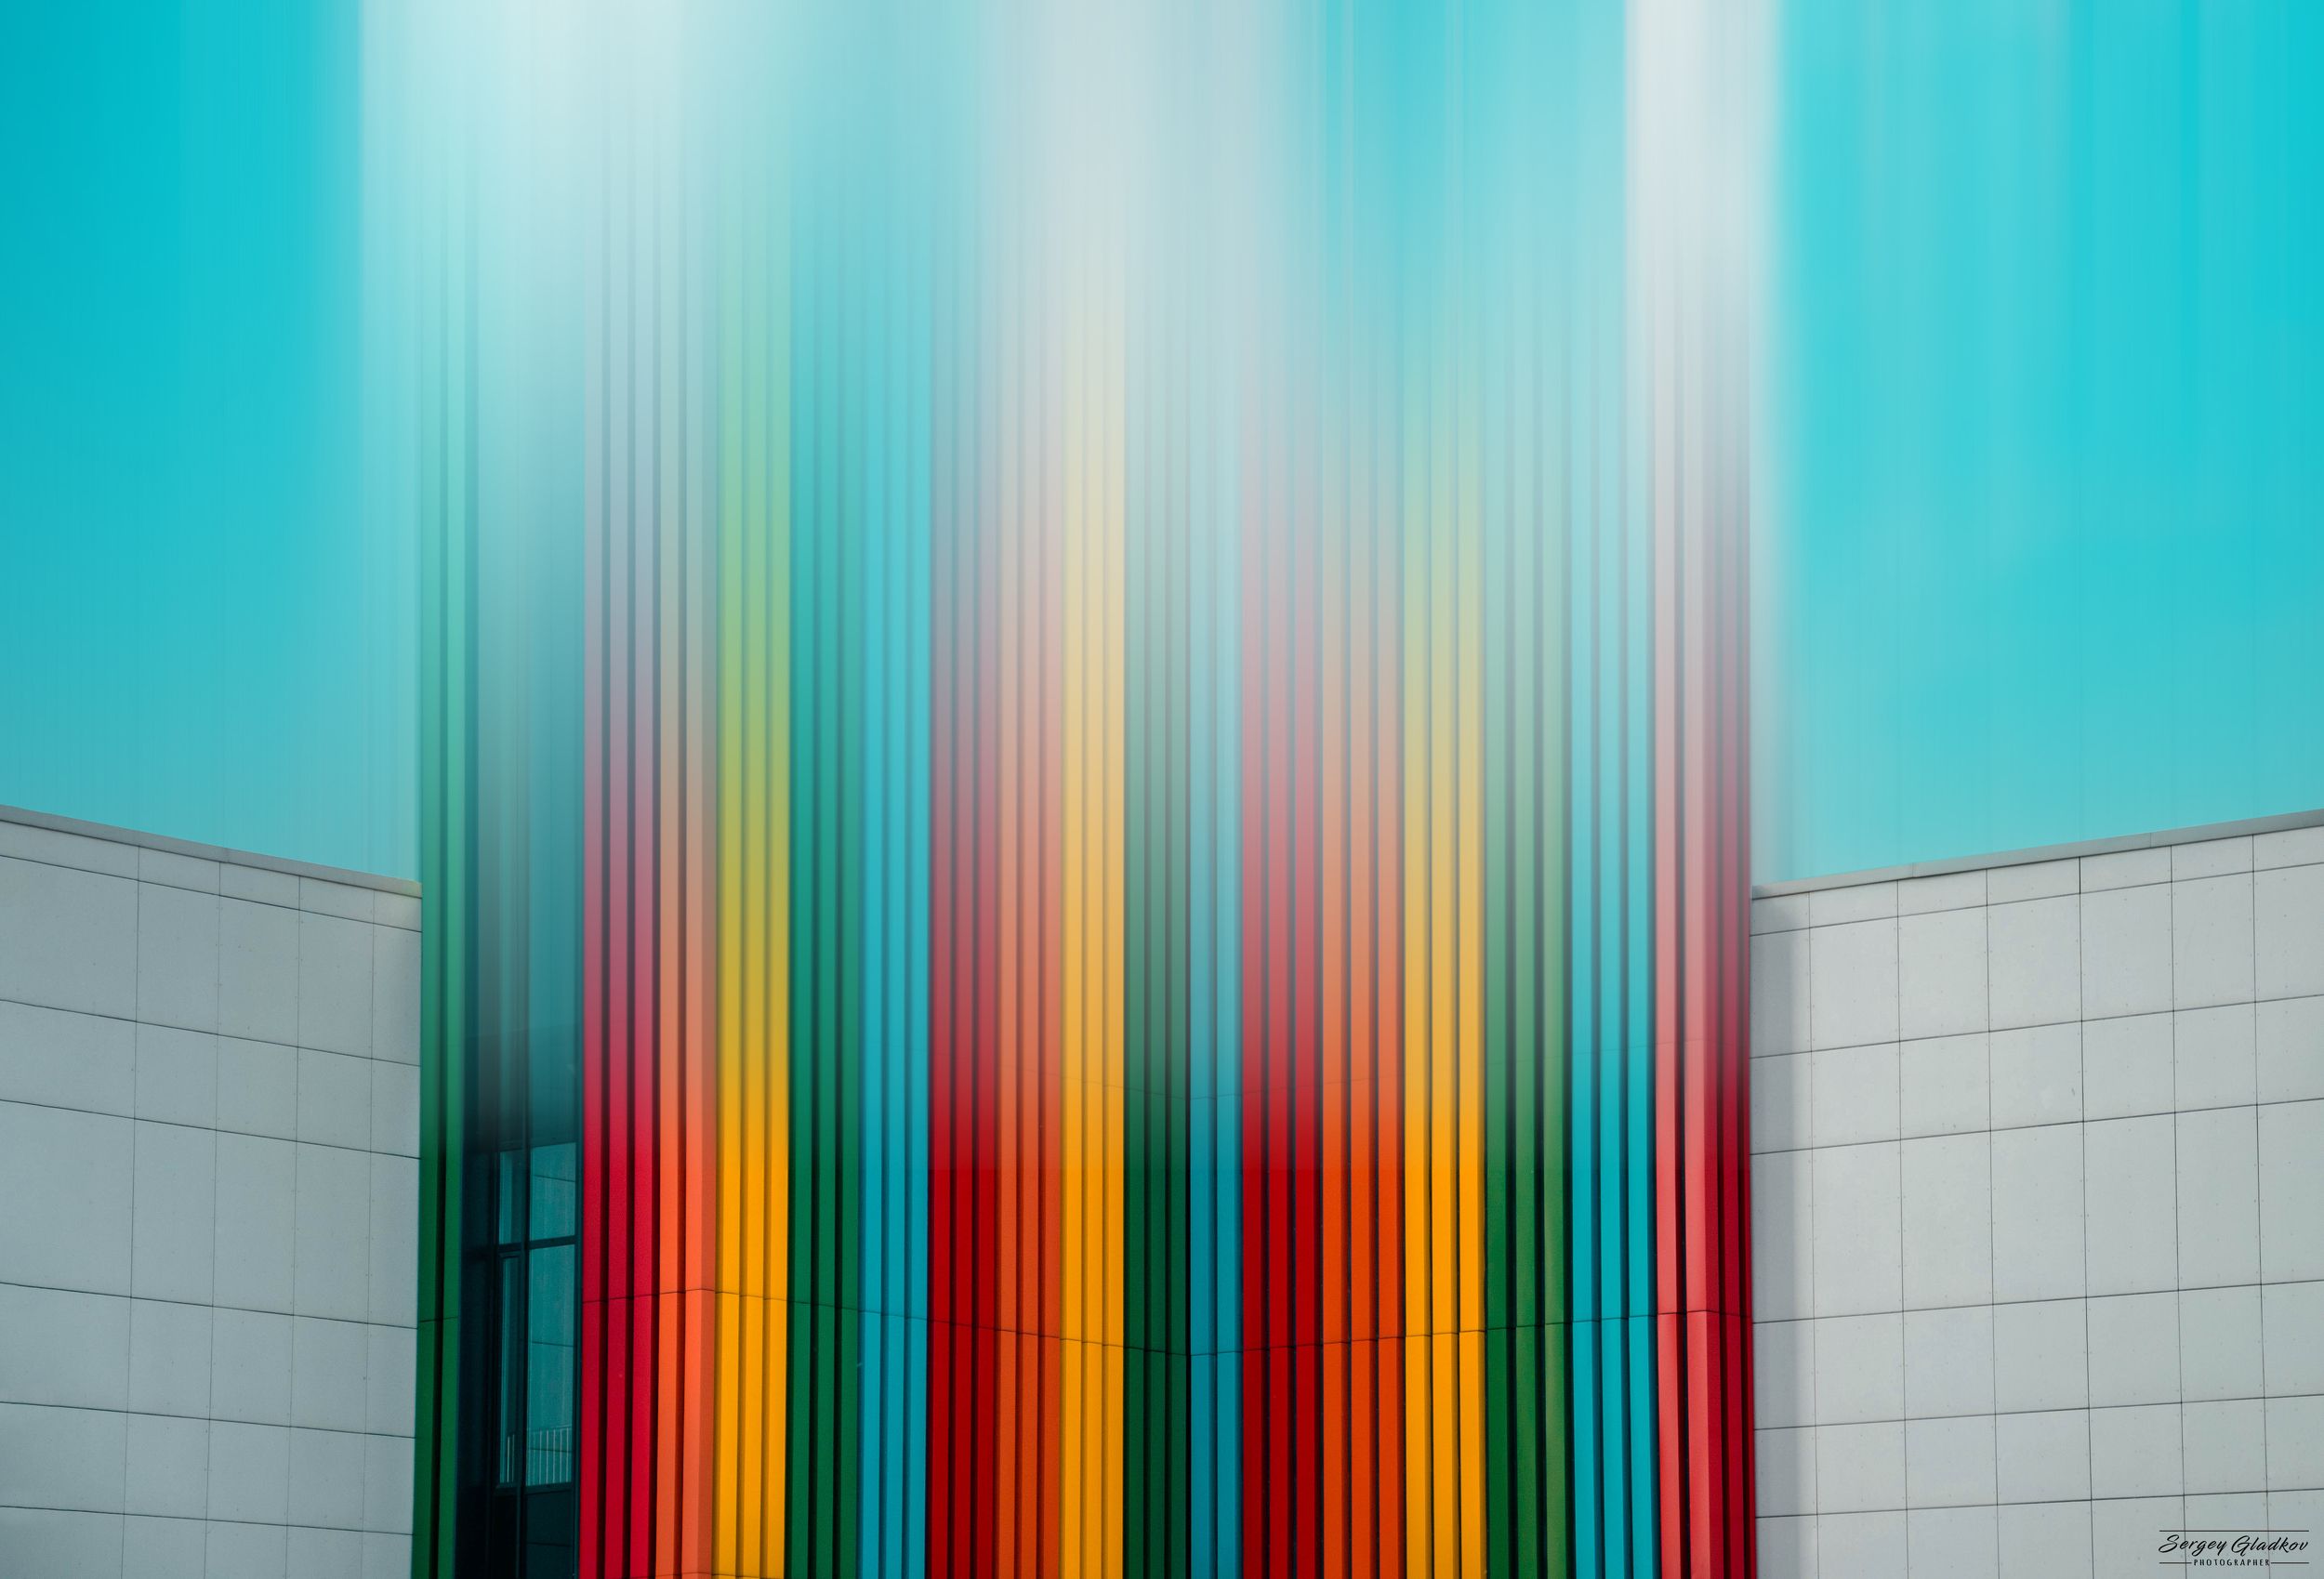 geometry, lines, rainbow, abstarct, colors, day, light, architecture, city, urban, Moscow, Russia , Сергей Гладков